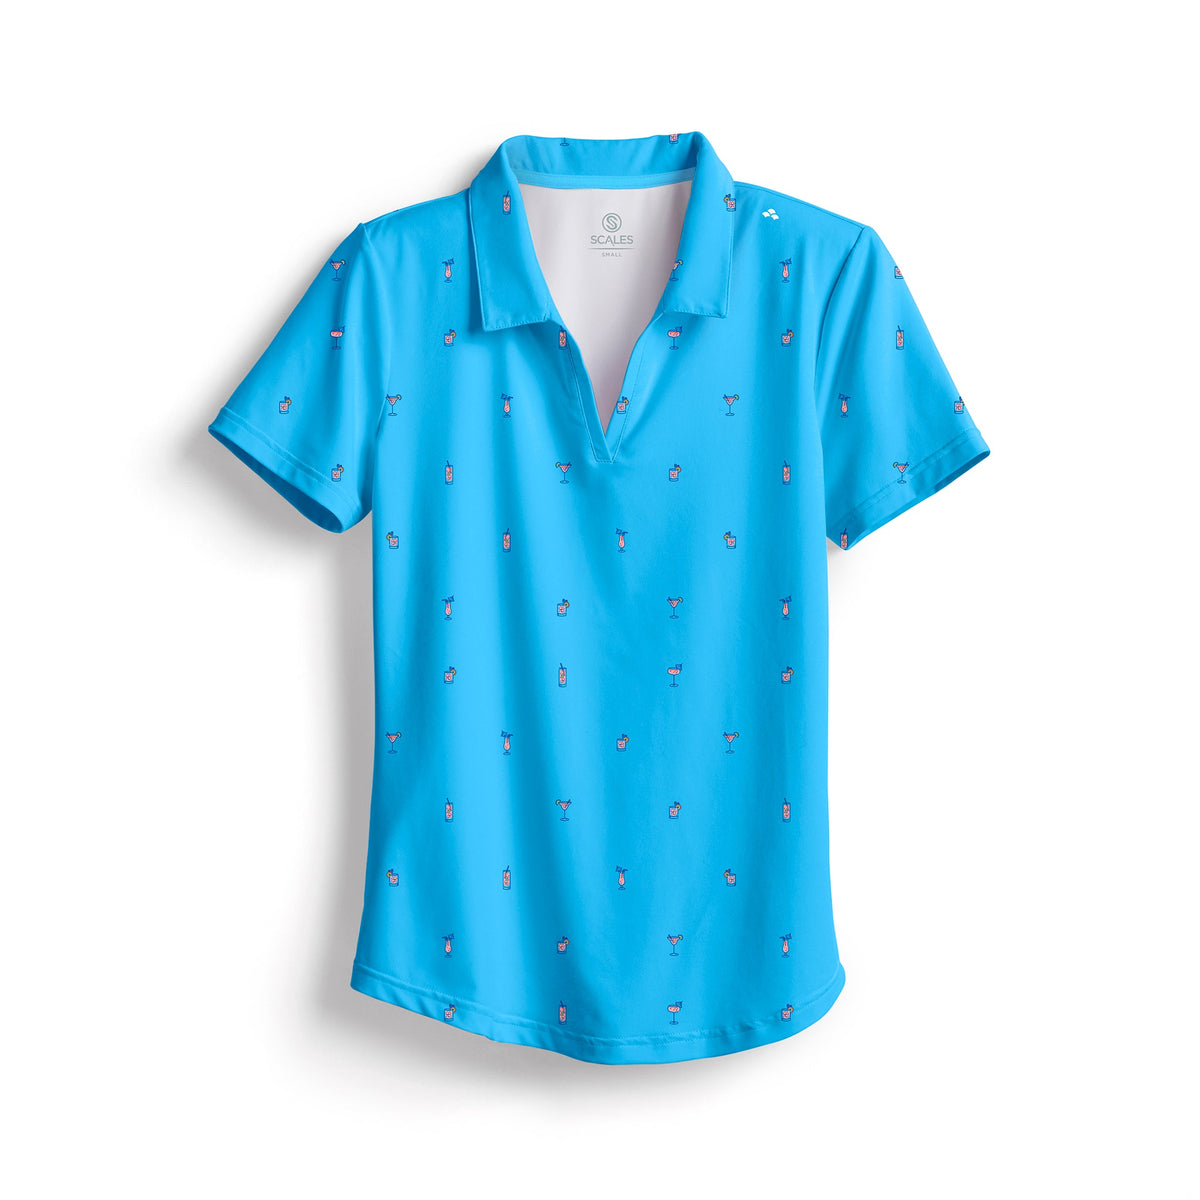 SCALES Cheers Womens Short Sleeve Polo